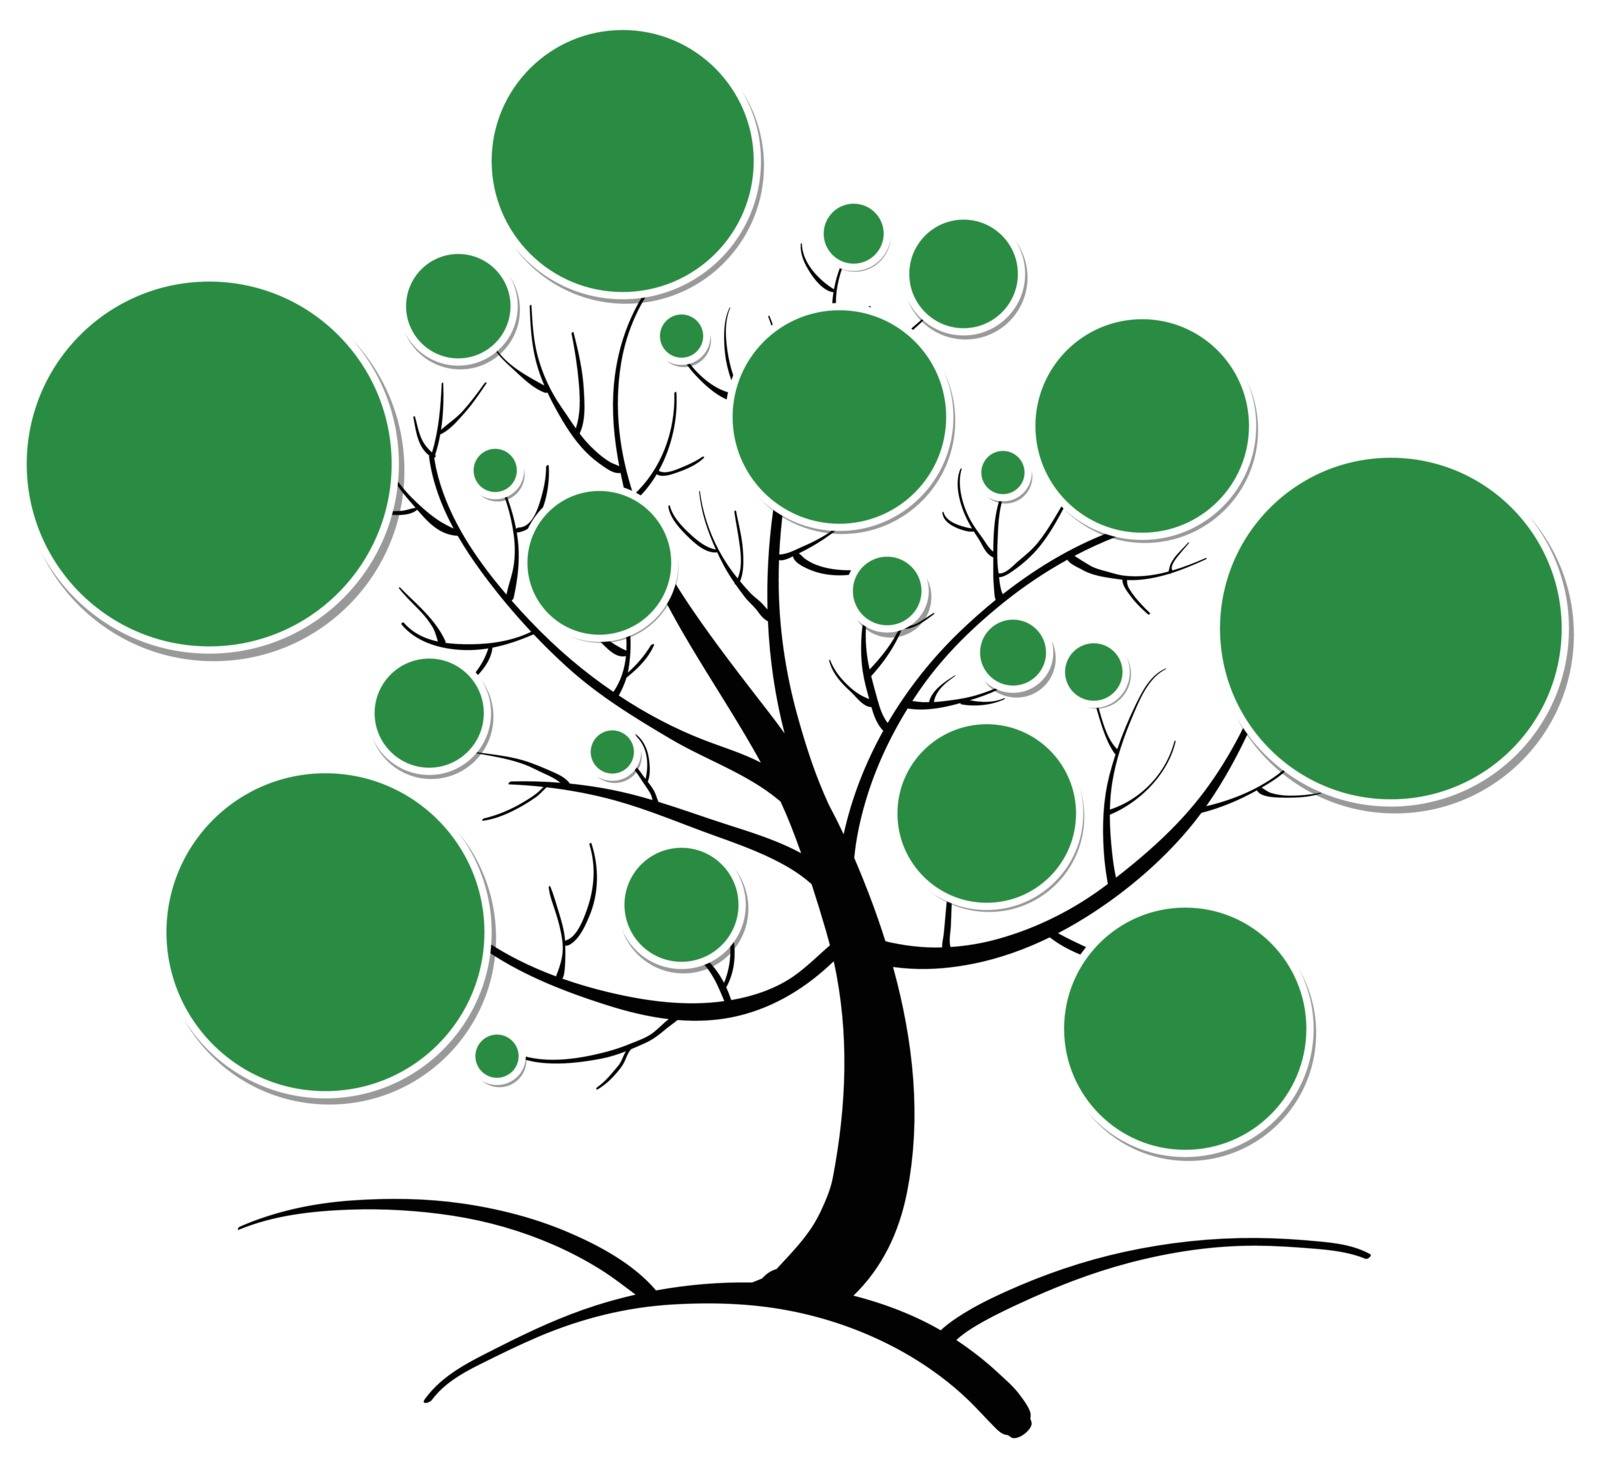 illustration of tree clipart on a white background